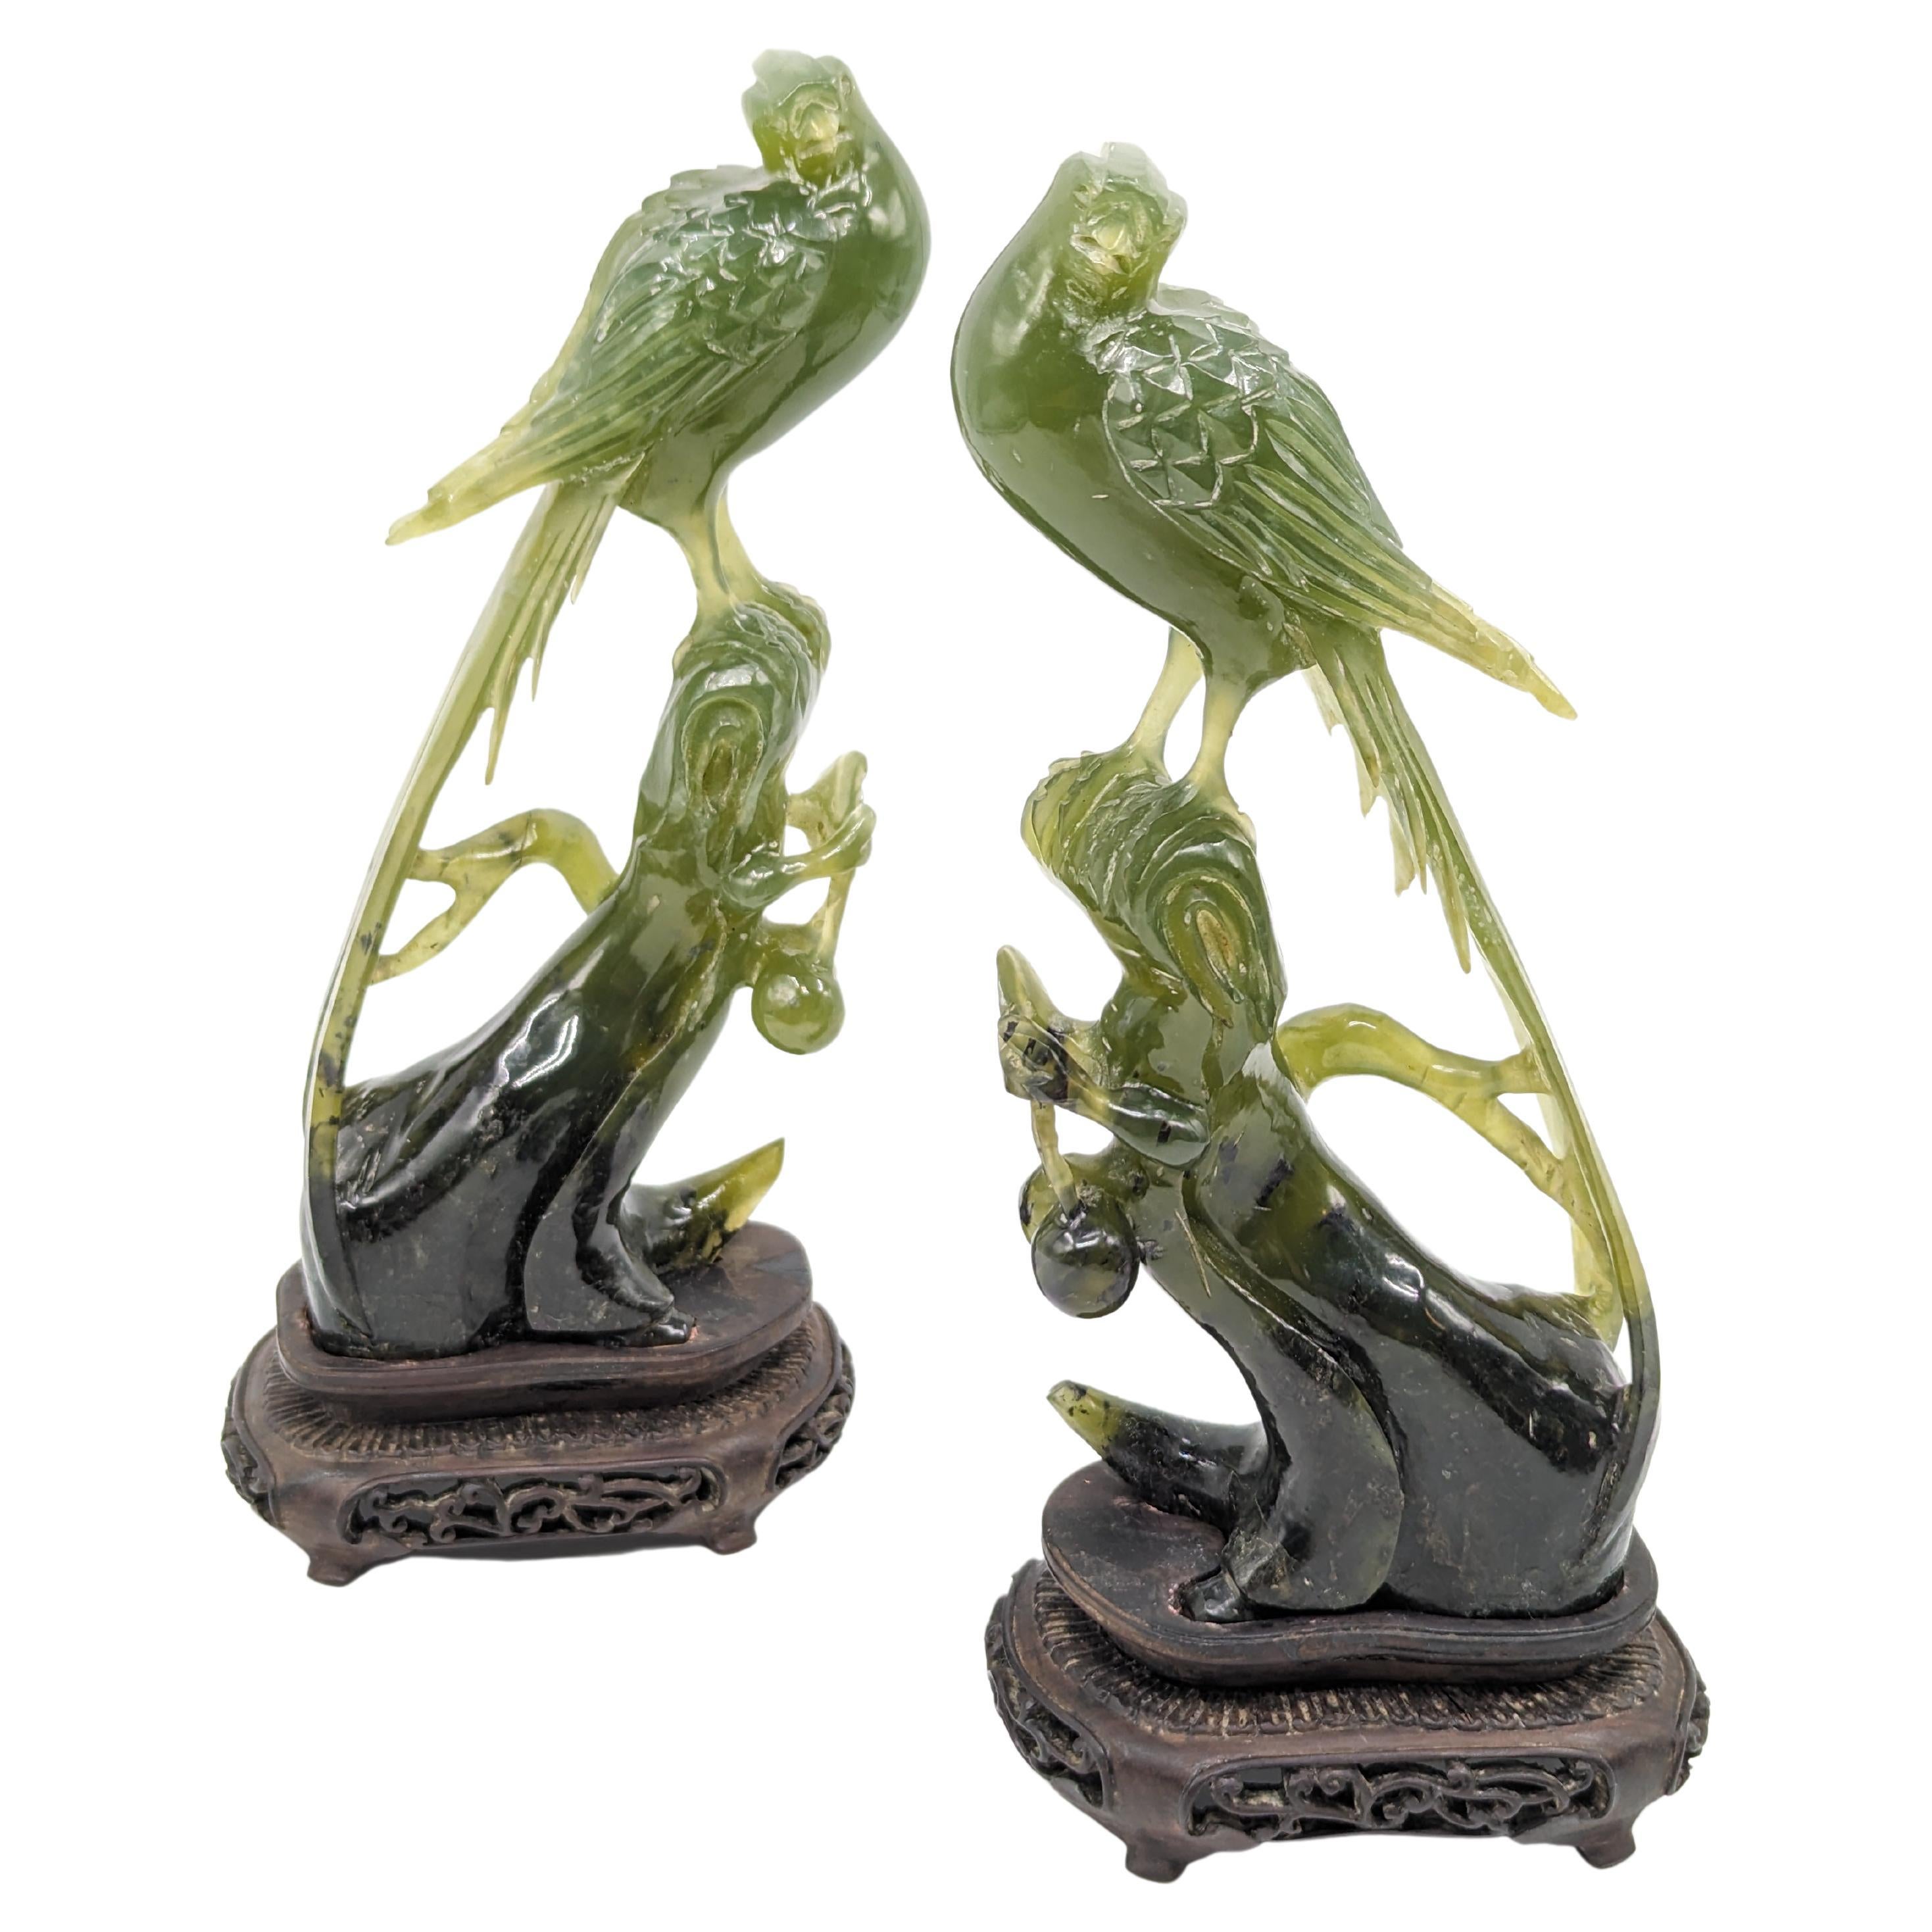 Presenting a magnificent pair of Chinese carved jade birds of prey, a true testament to the intricate artistry and craftsmanship synonymous with Chinese jade sculpting. These exquisite figures stand majestically on intricately carved fruit tree